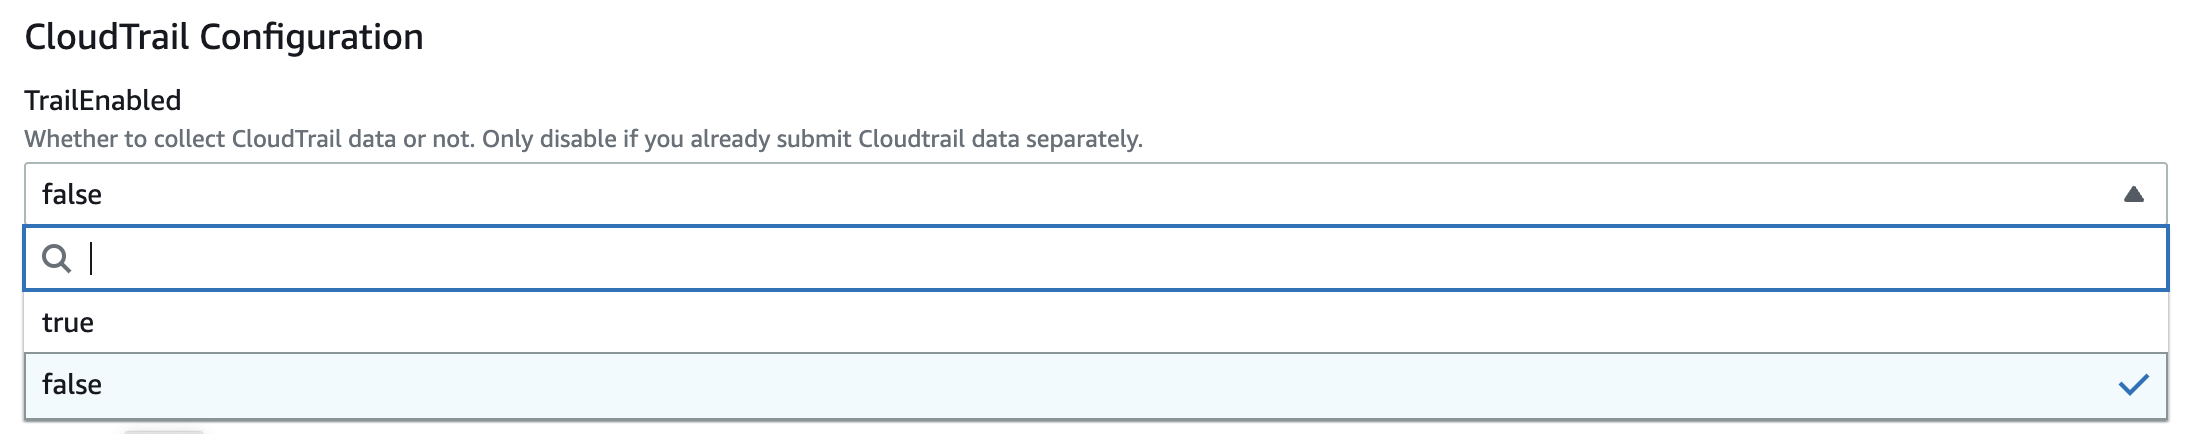 CloudFormation Configuration in the AWS Console. In the TrailEnabled dropdown, select "false".